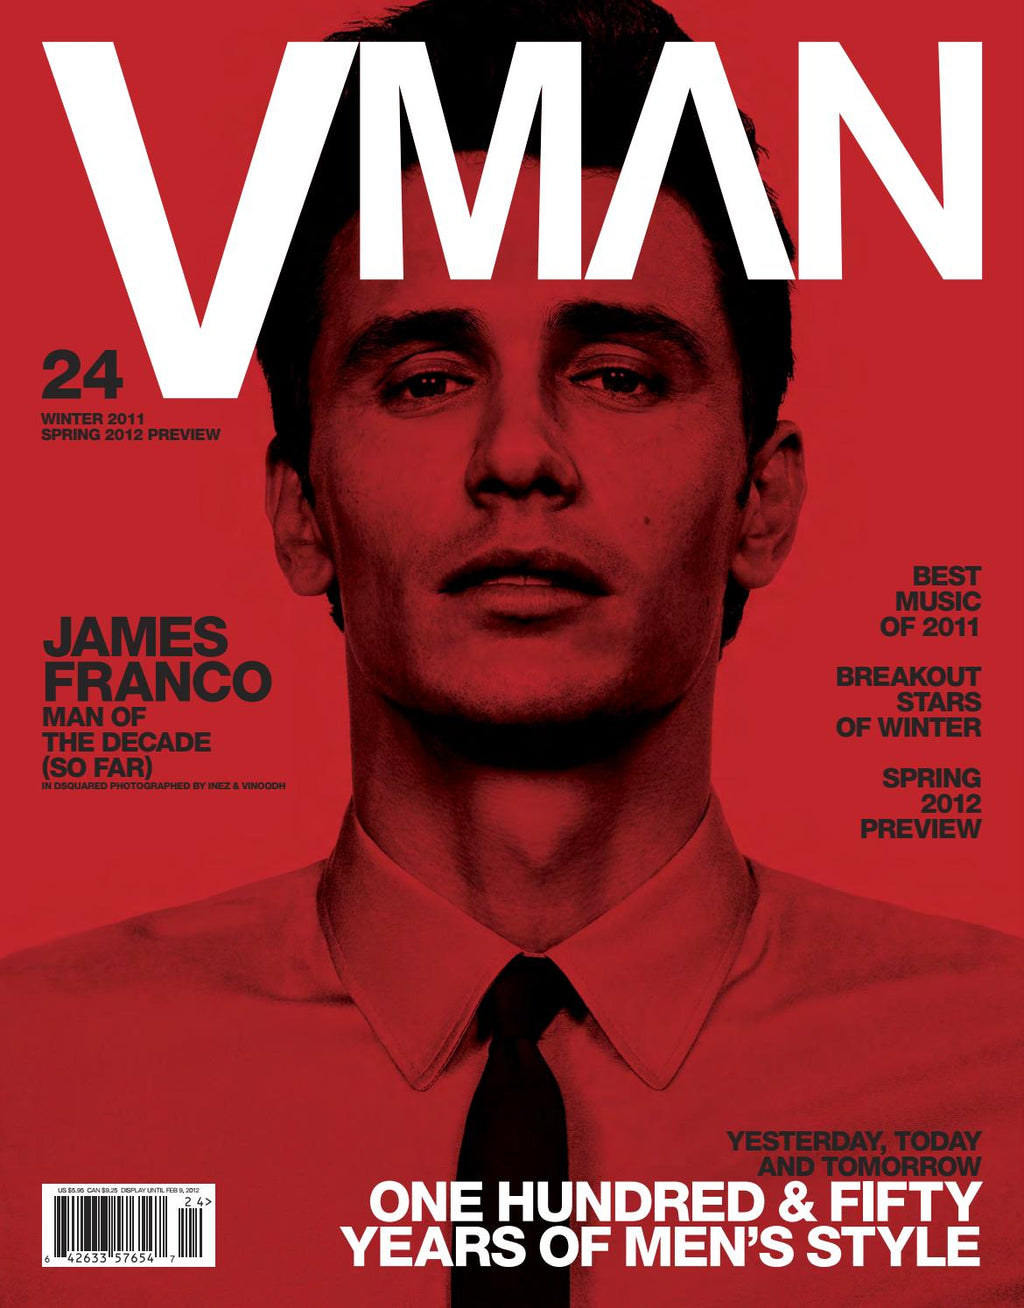 VMAN 24 "ONE HUNDRED & FIFTY YEARS OF FASHION"